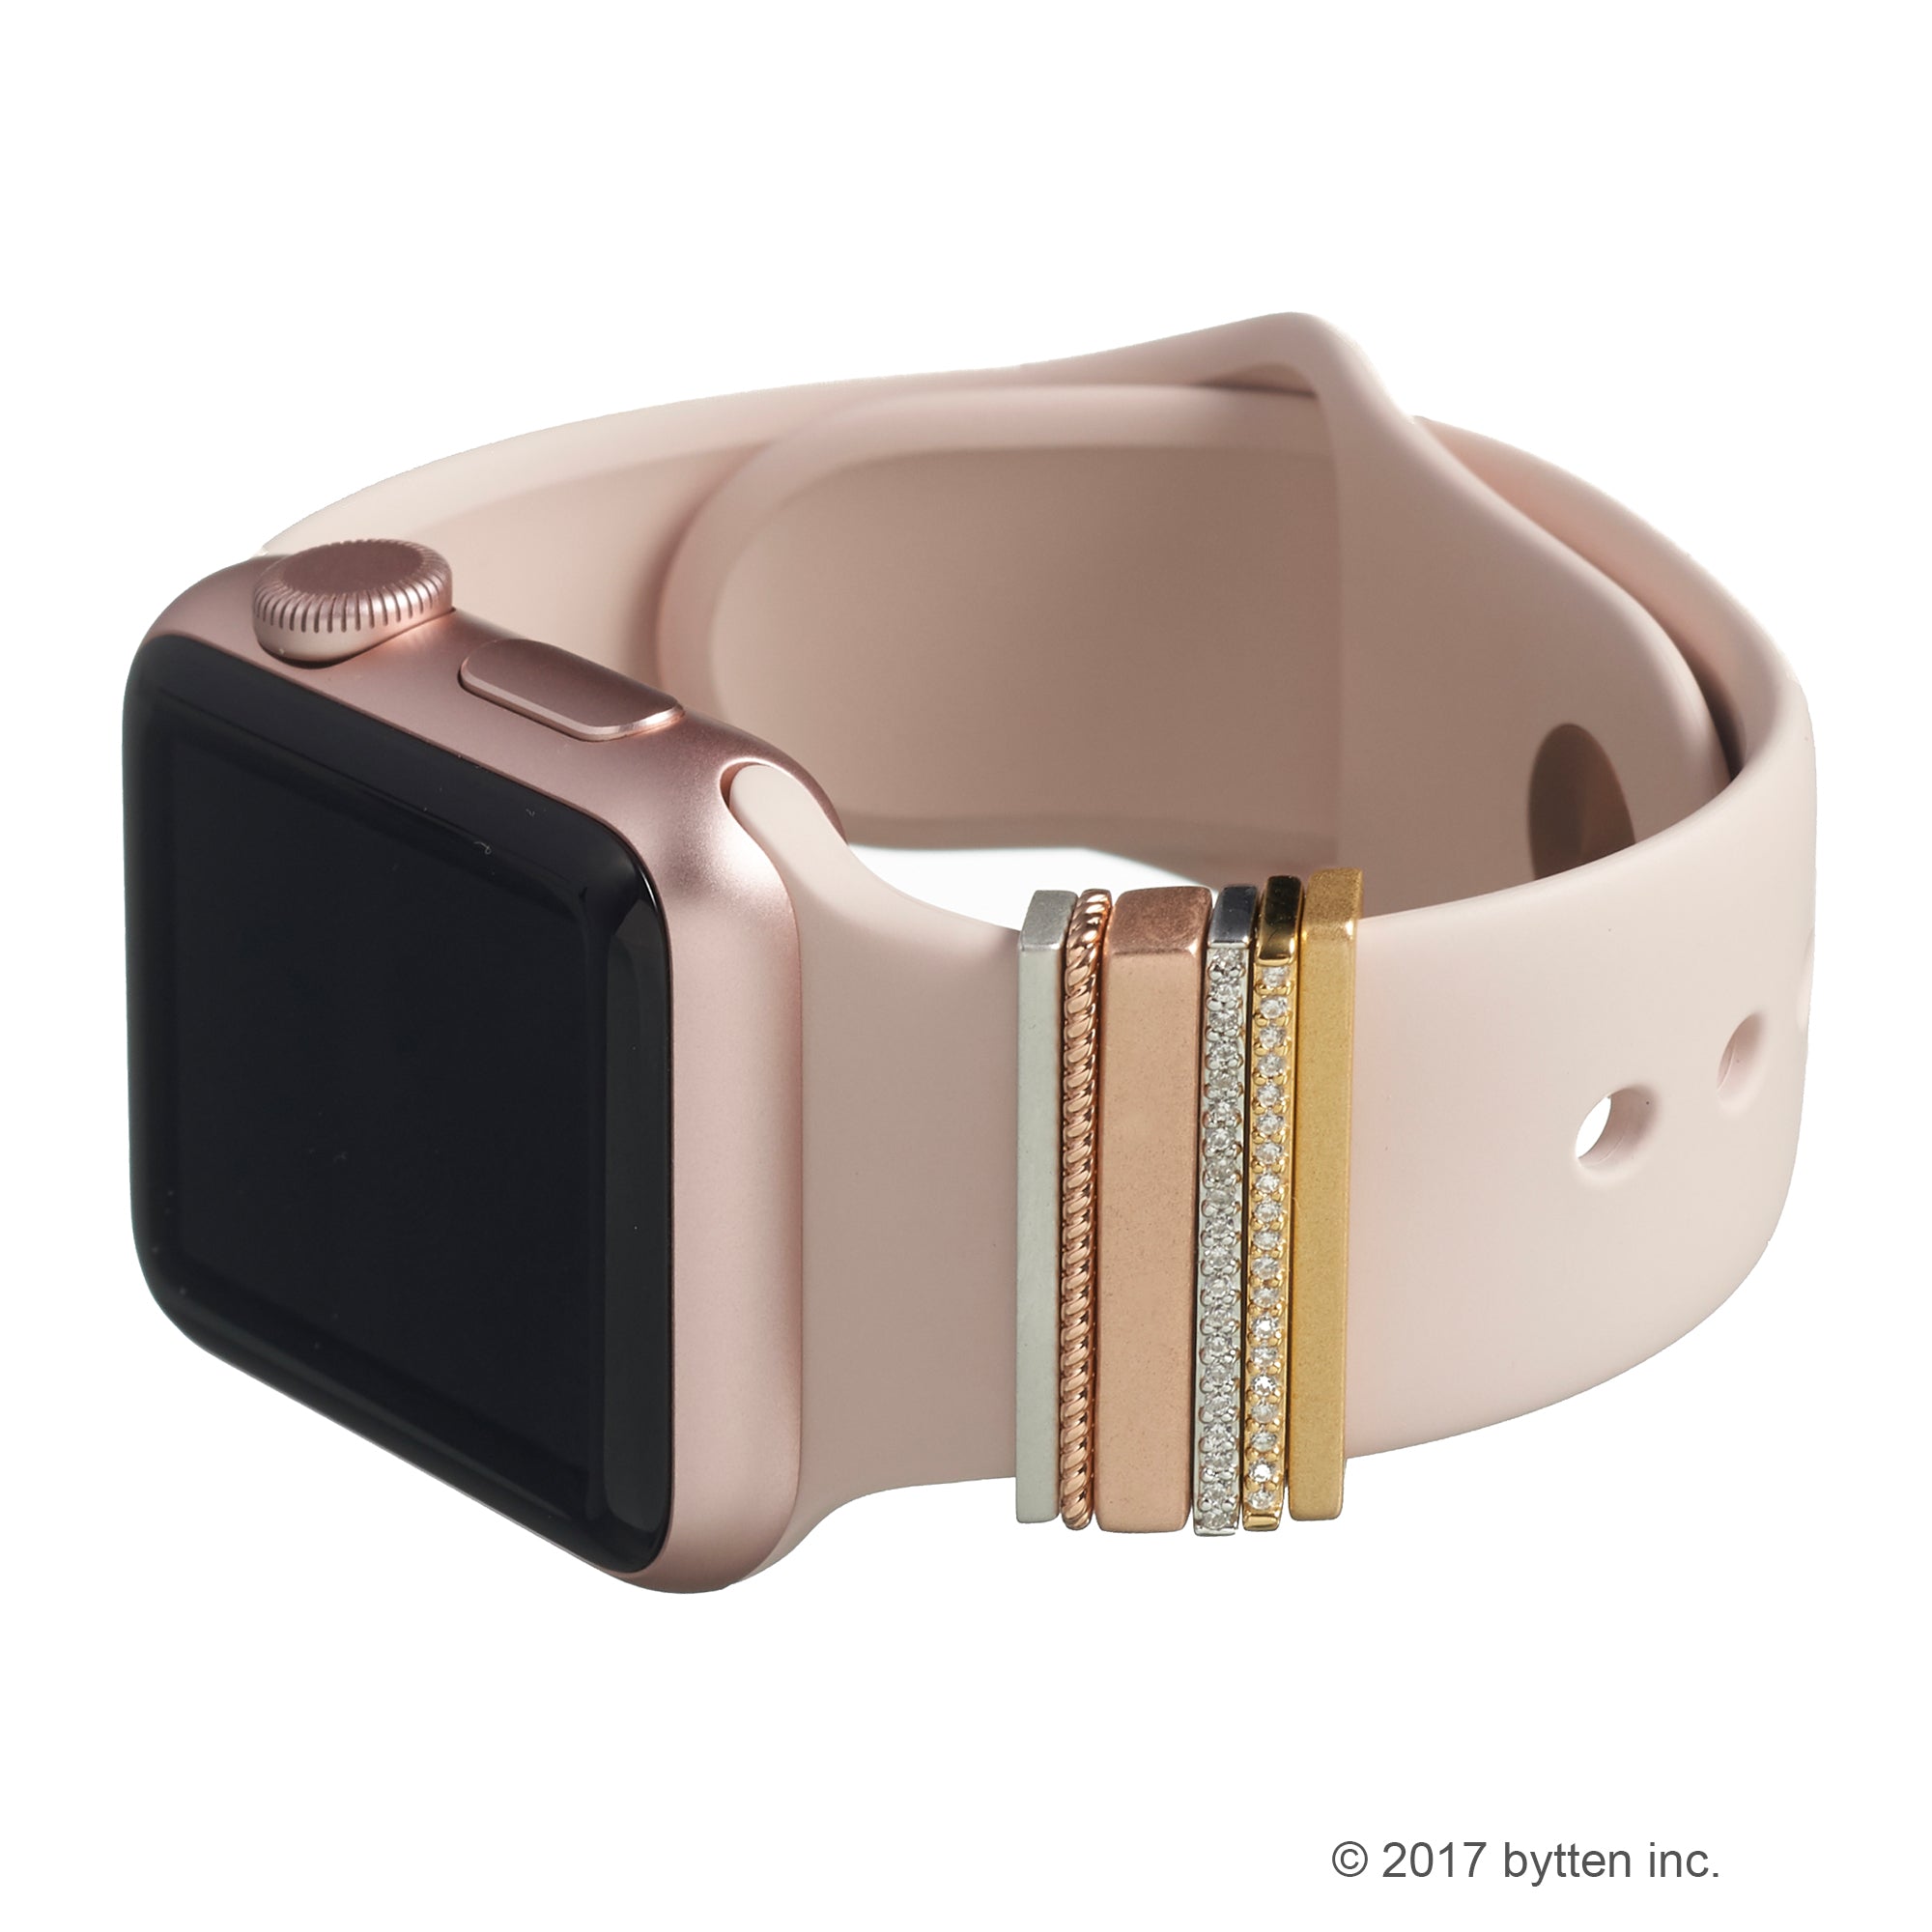 bytten ultimate glam stack on rose gold Apple Watch with pink blush bytten band